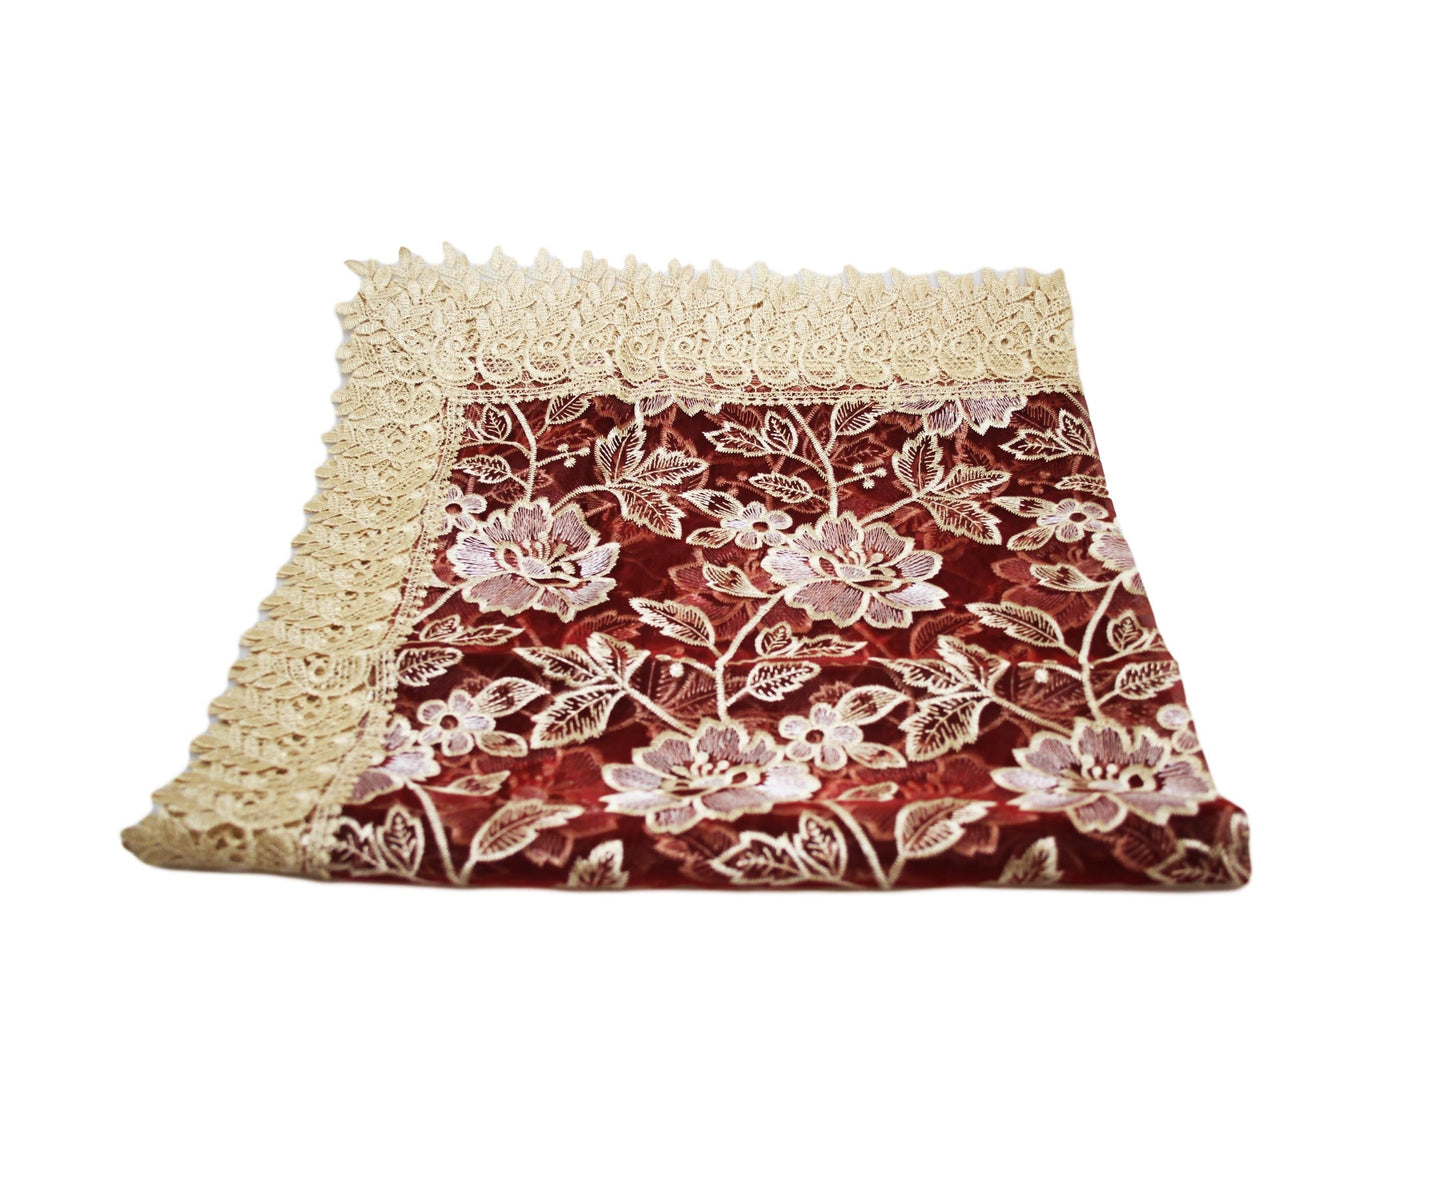 Decorative Polyester Traditional Moroccan Lace Floral Table Cloth Cover Runner 85 x 85 cm Assorted Colours and Designs 6038 (Large Letter Rate)